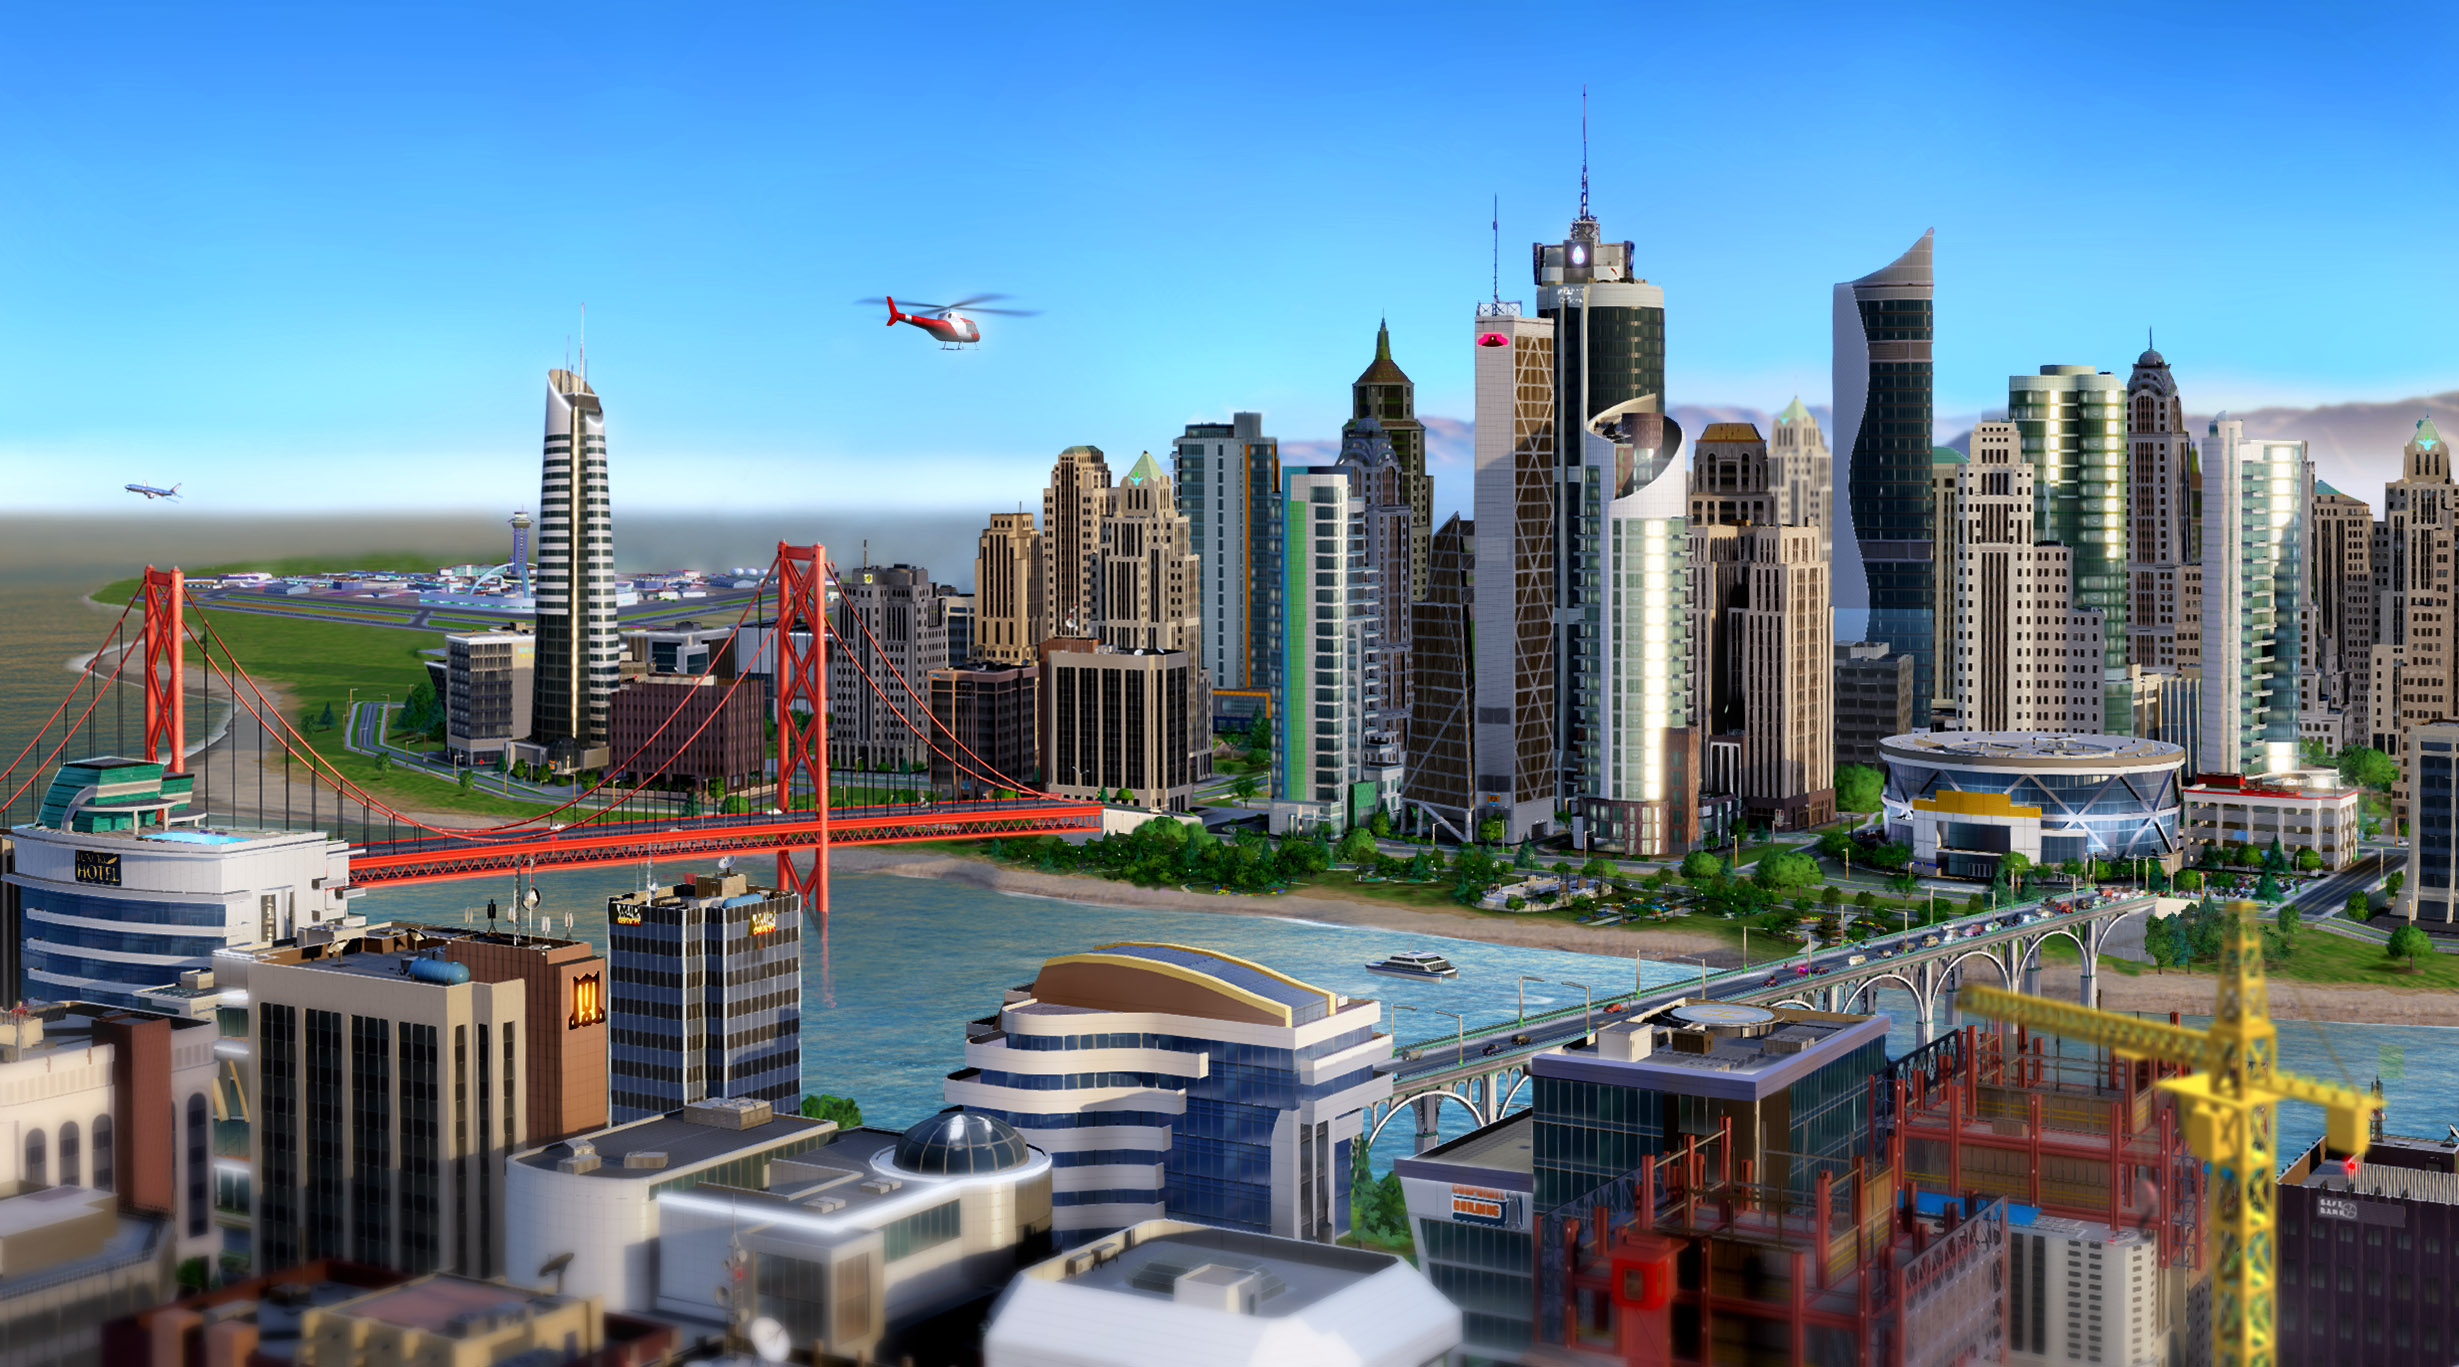 Maxis Takes Full Responsibility over Simcity’s Always-Online Requirement. (Lucy Bradshaw Twitter Recap)